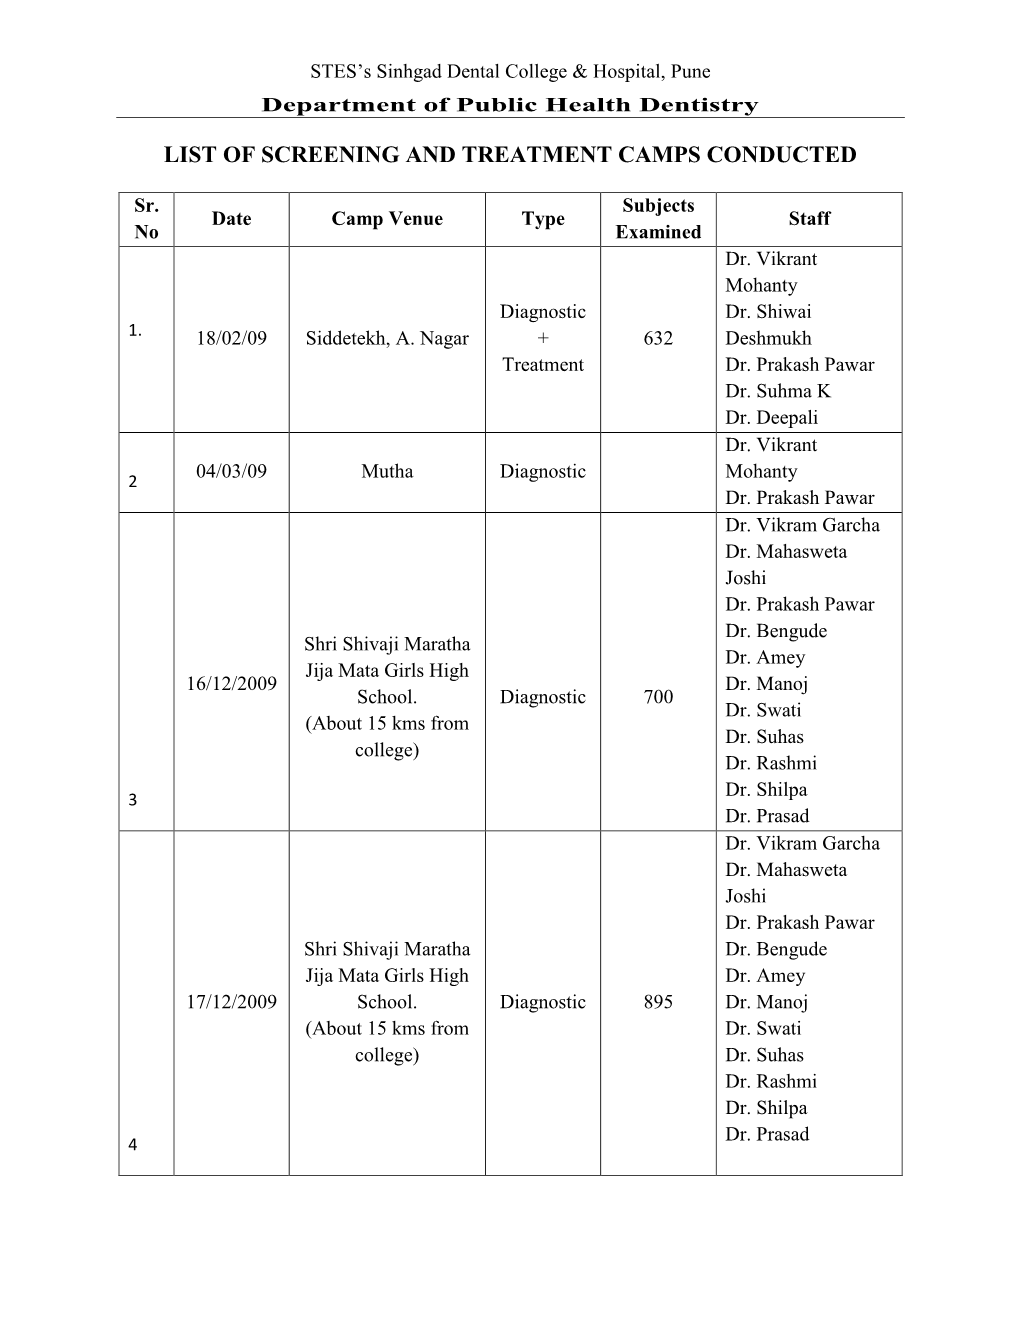 List of Screening and Treatment Camps Conducted